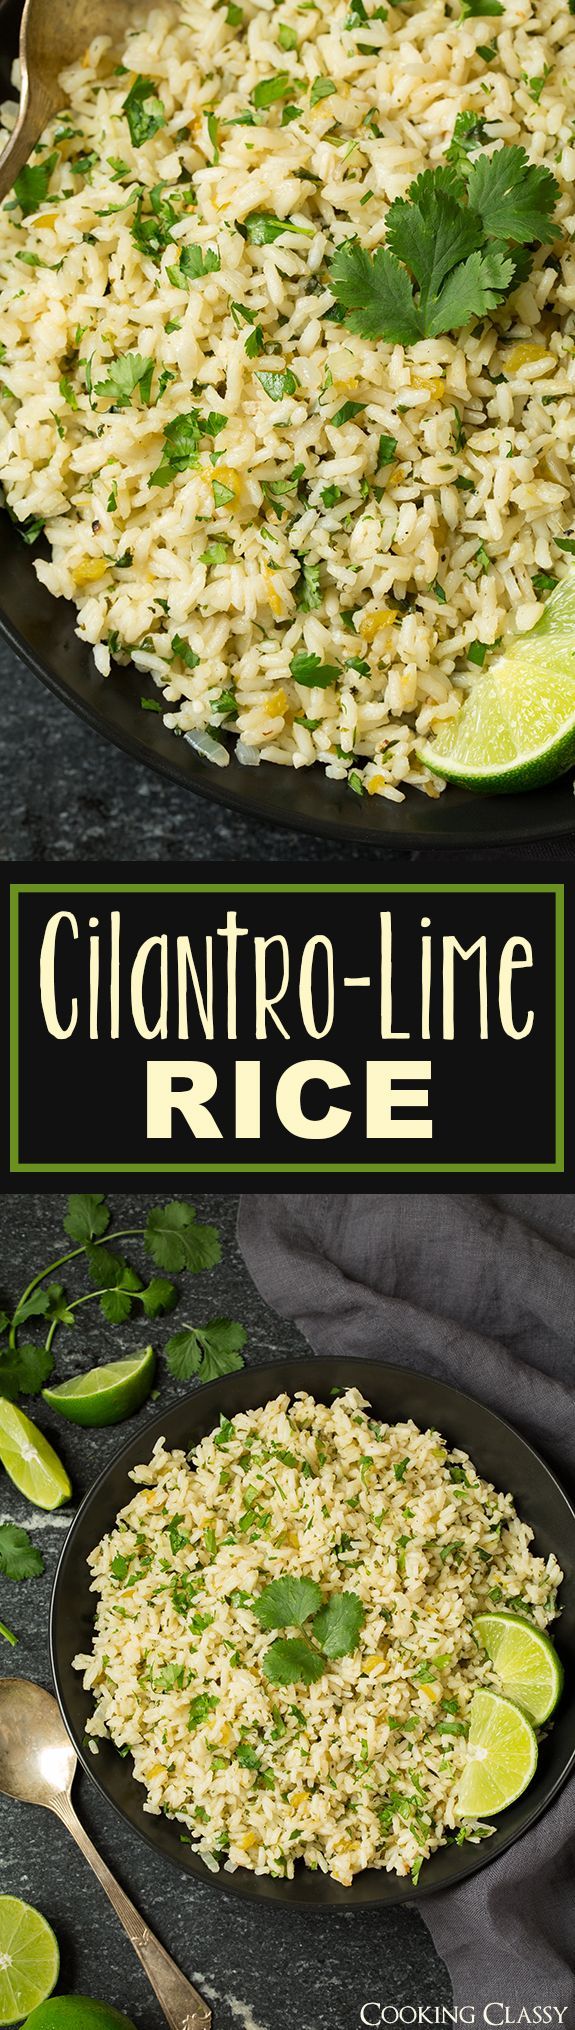 Cilantro Lime Rice – I can never get enough of this stuff! I crave it all the time! Perfect side for just about any Mexican or